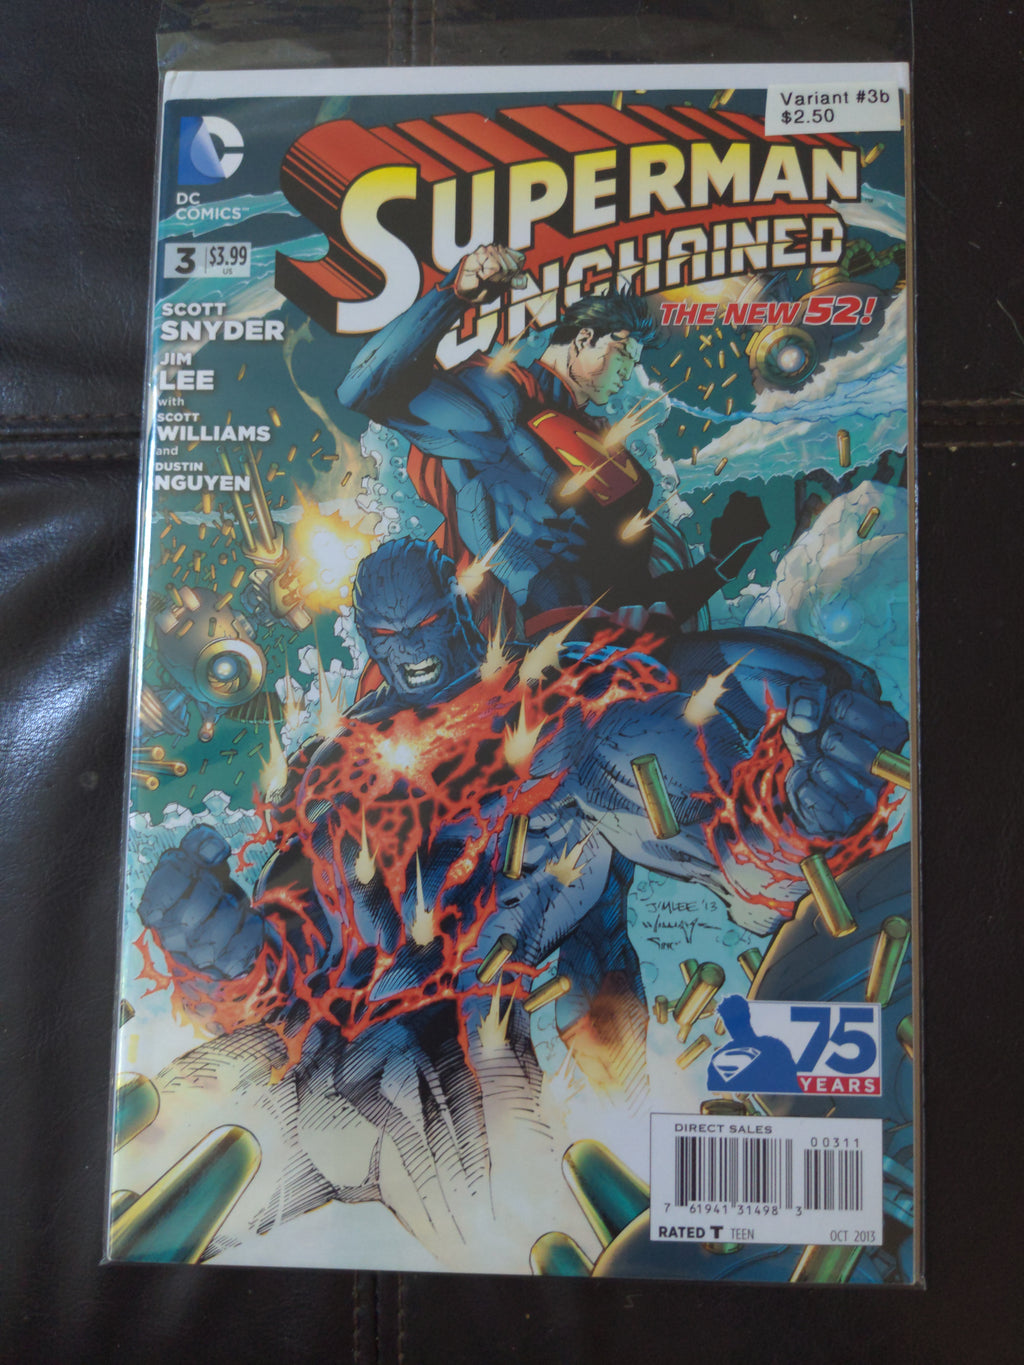 Superman Unchained #3 Variant b (from Combo Pack) DC Comics The New 52